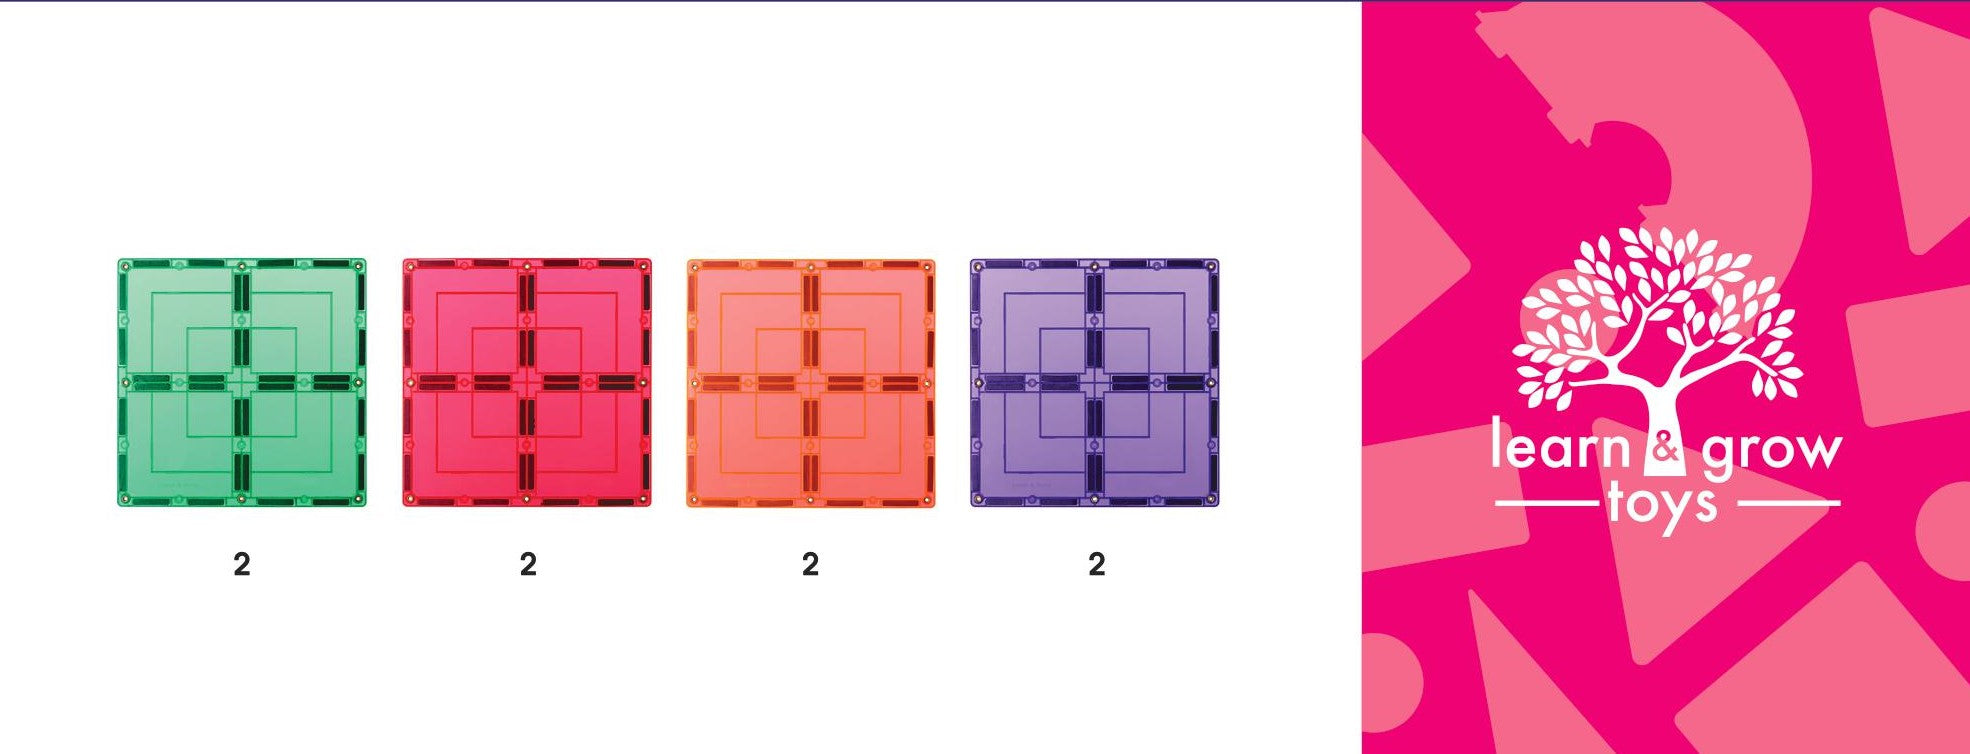 Learn And Grow - Magnetisch constructiespeelgoed Large Square Pack - 8 stuks